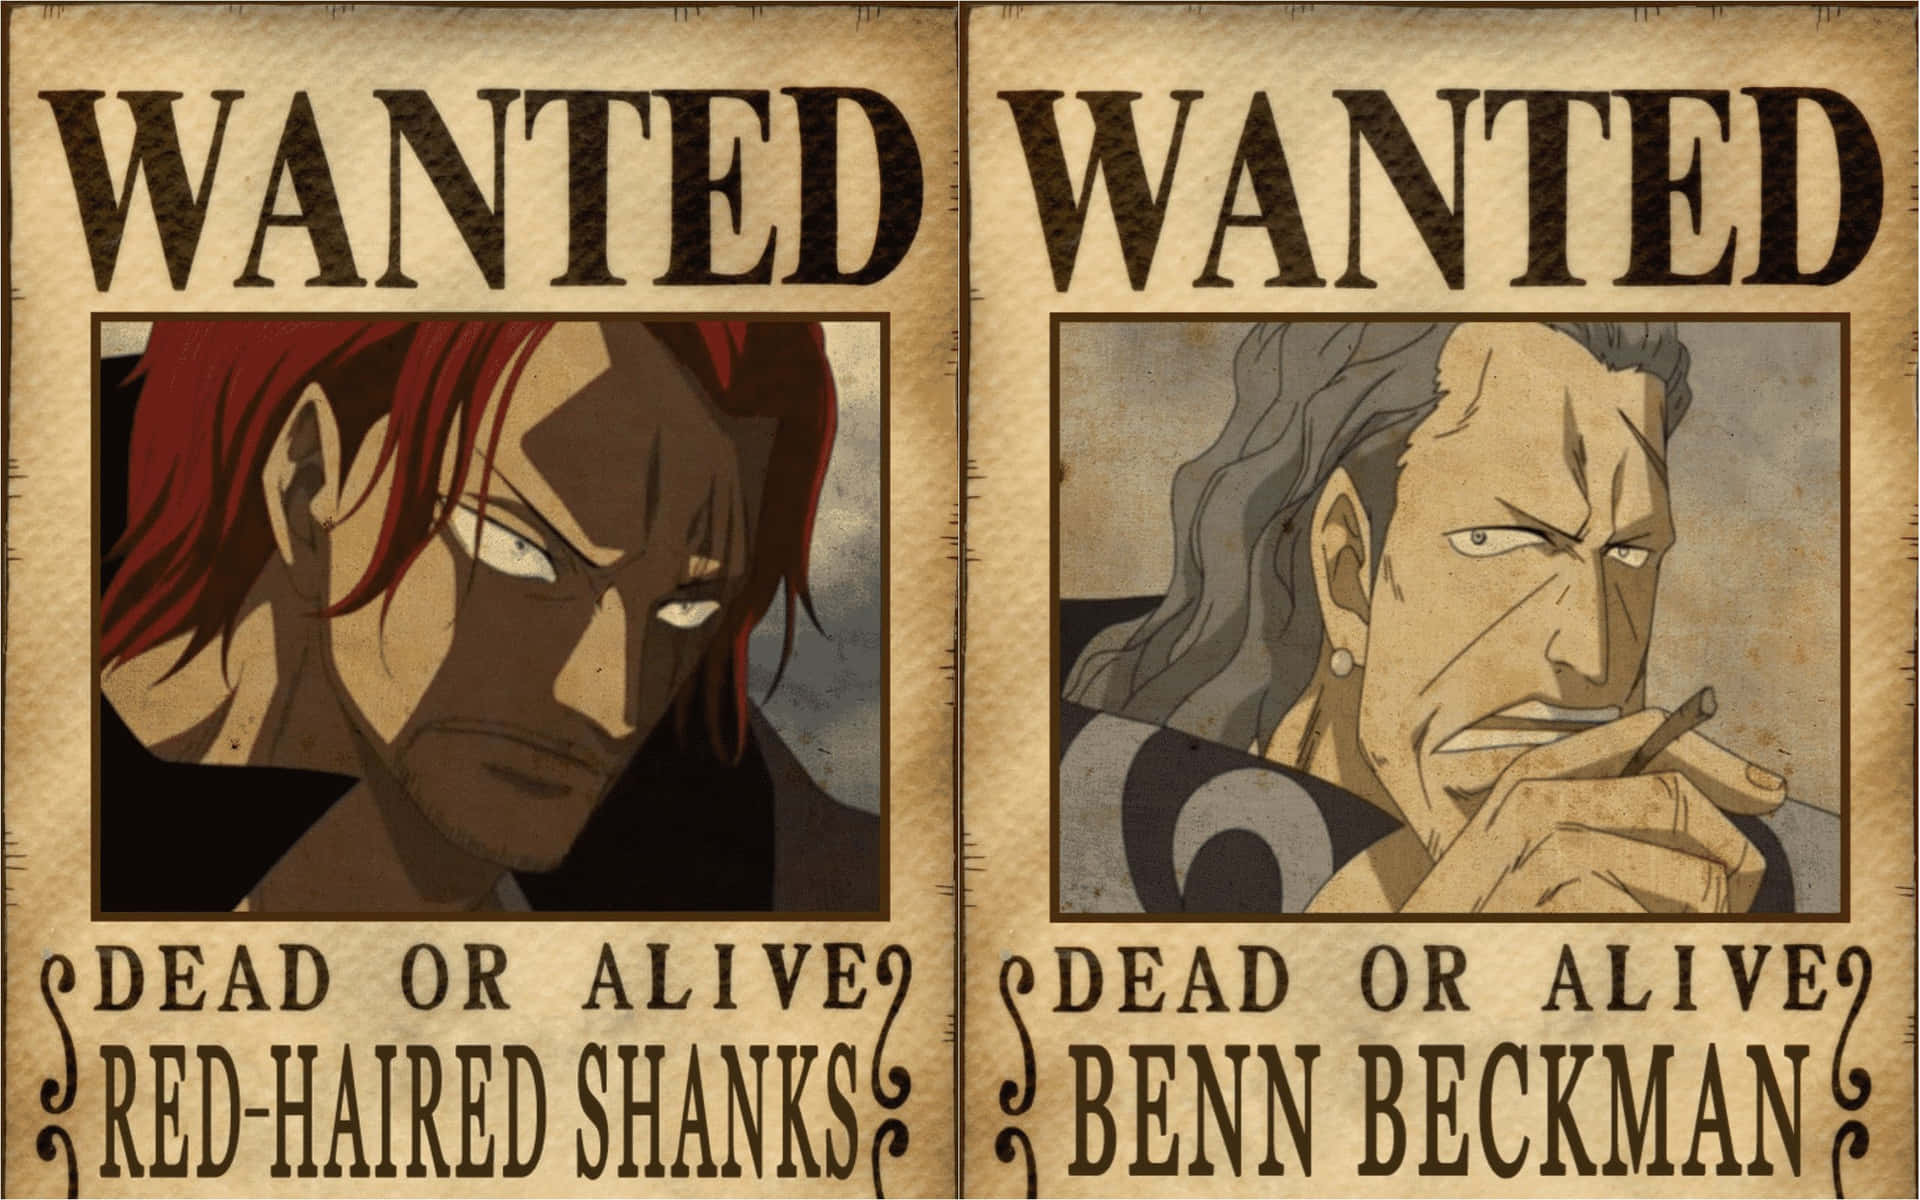 A dramatic wild west wanted poster on a rustic wooden wall